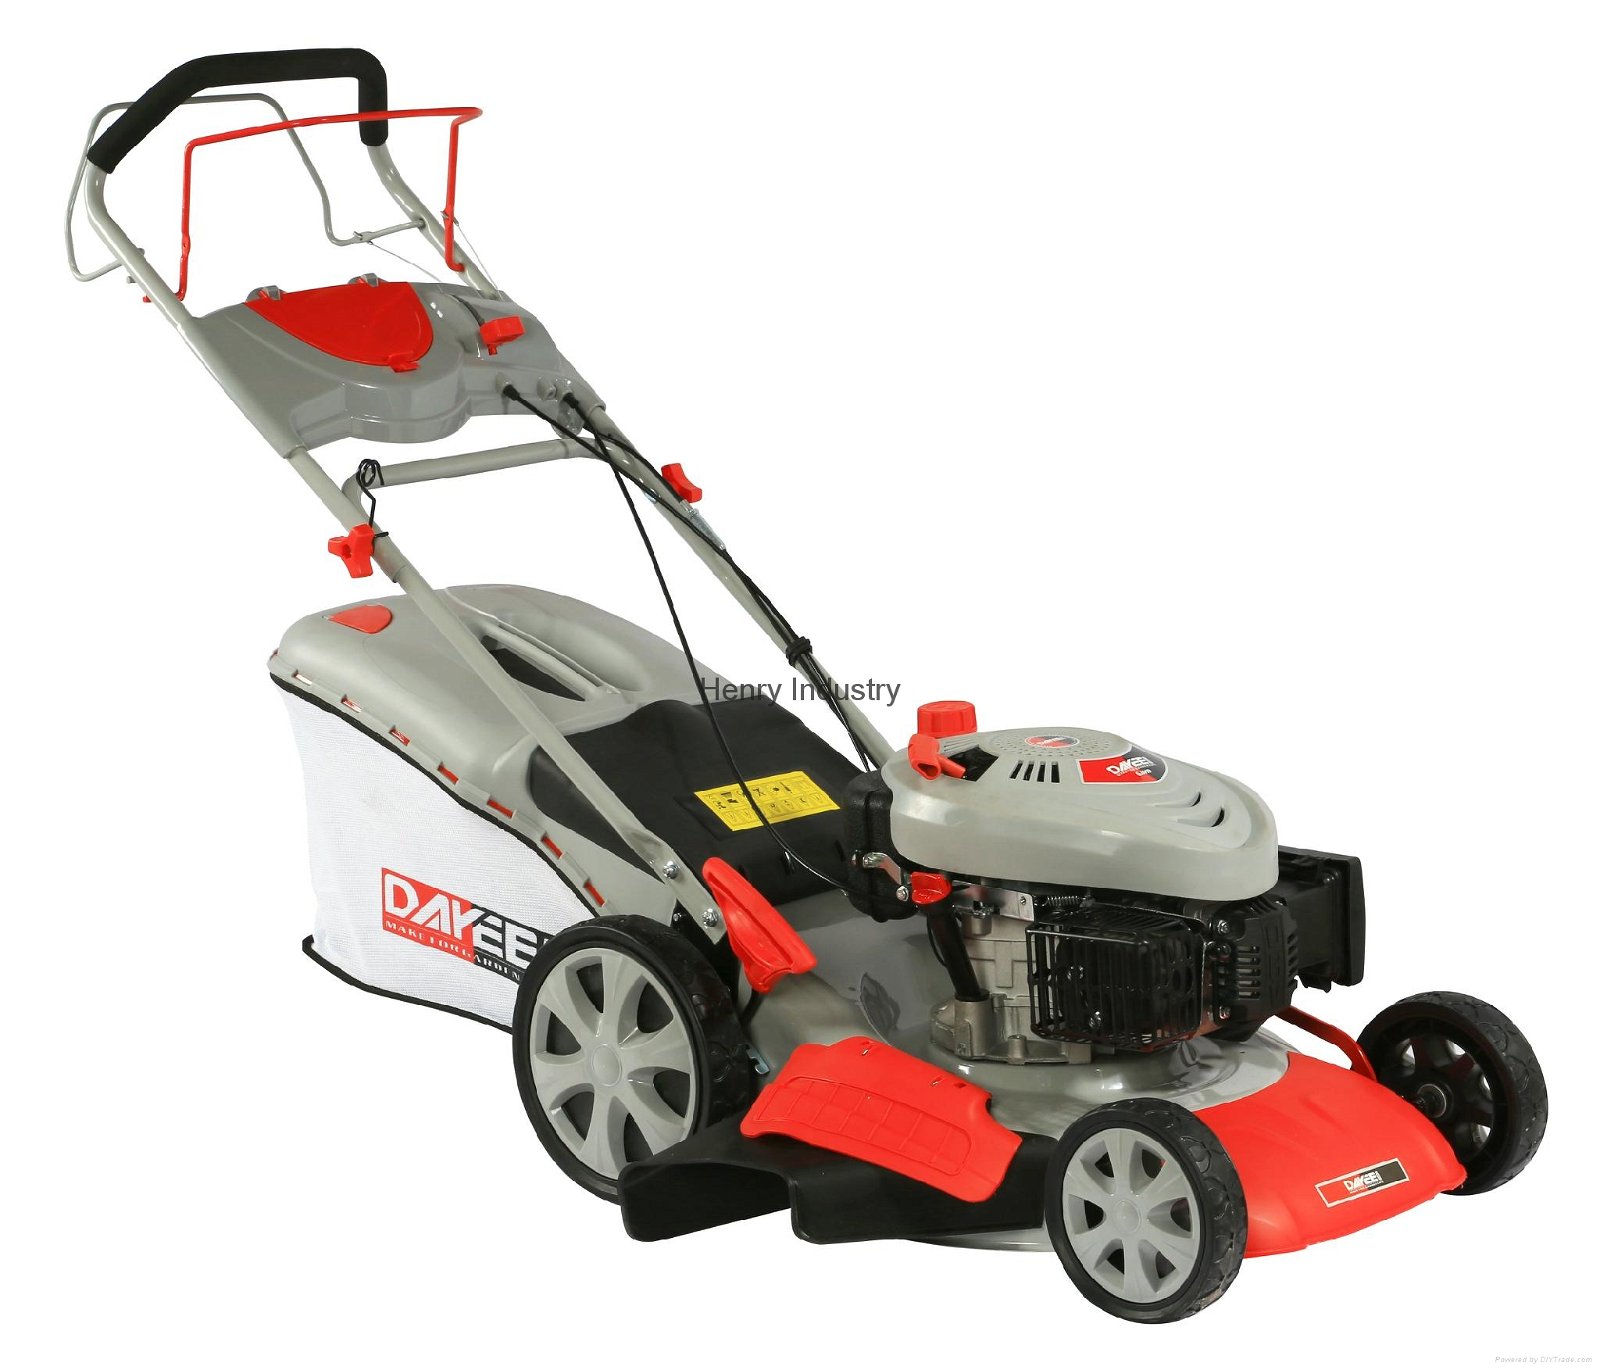 19" lawn mower with Chinese engine